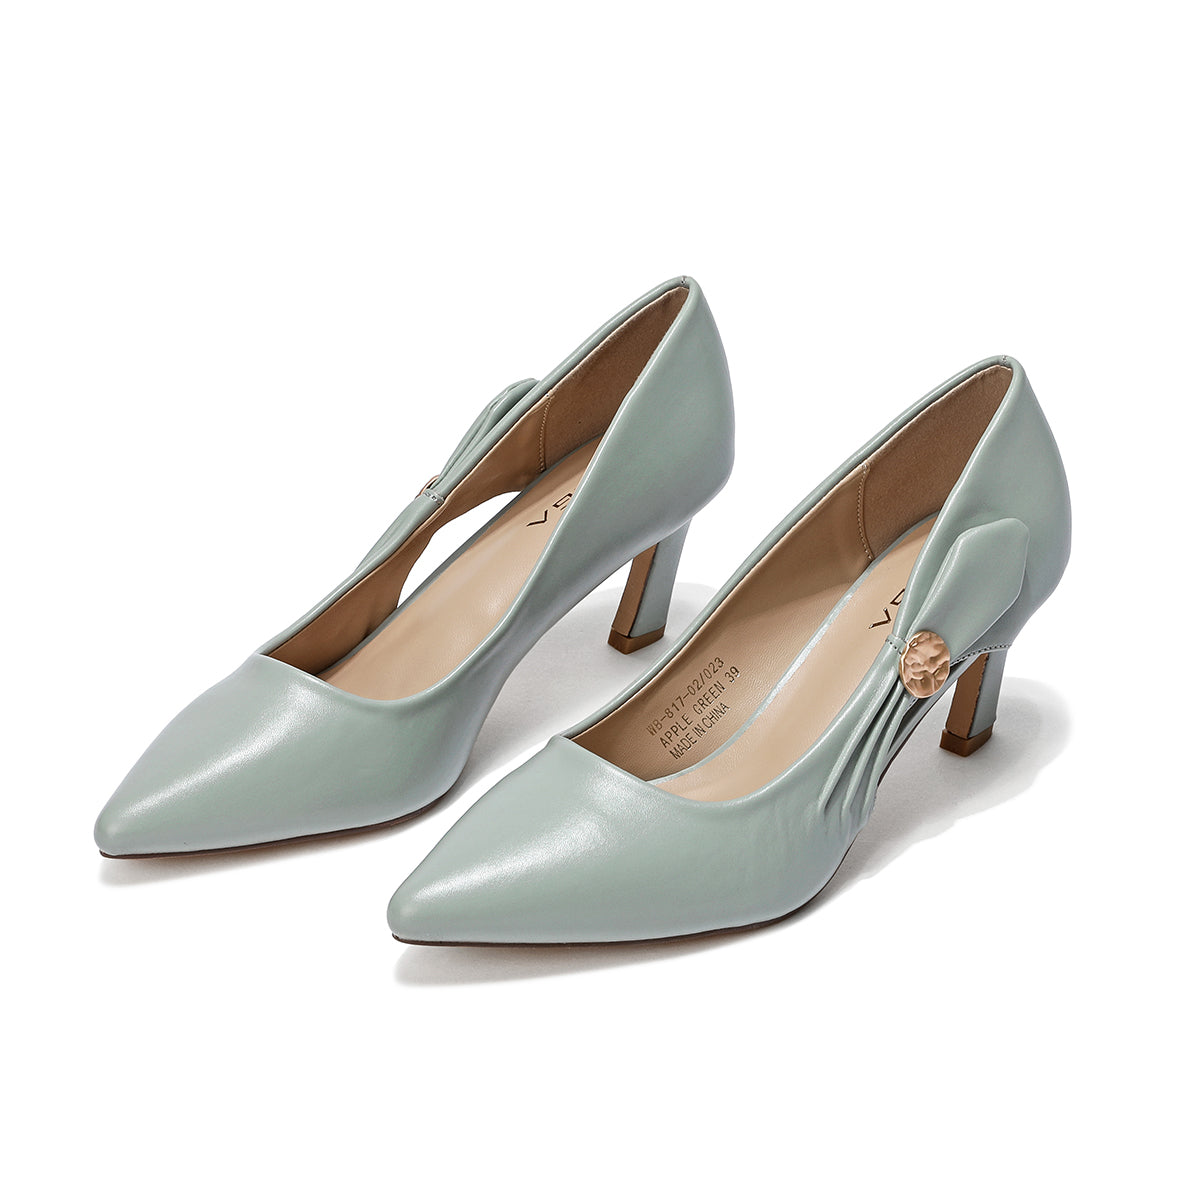 Heels with a simple and elegant design, light green color, several sizes